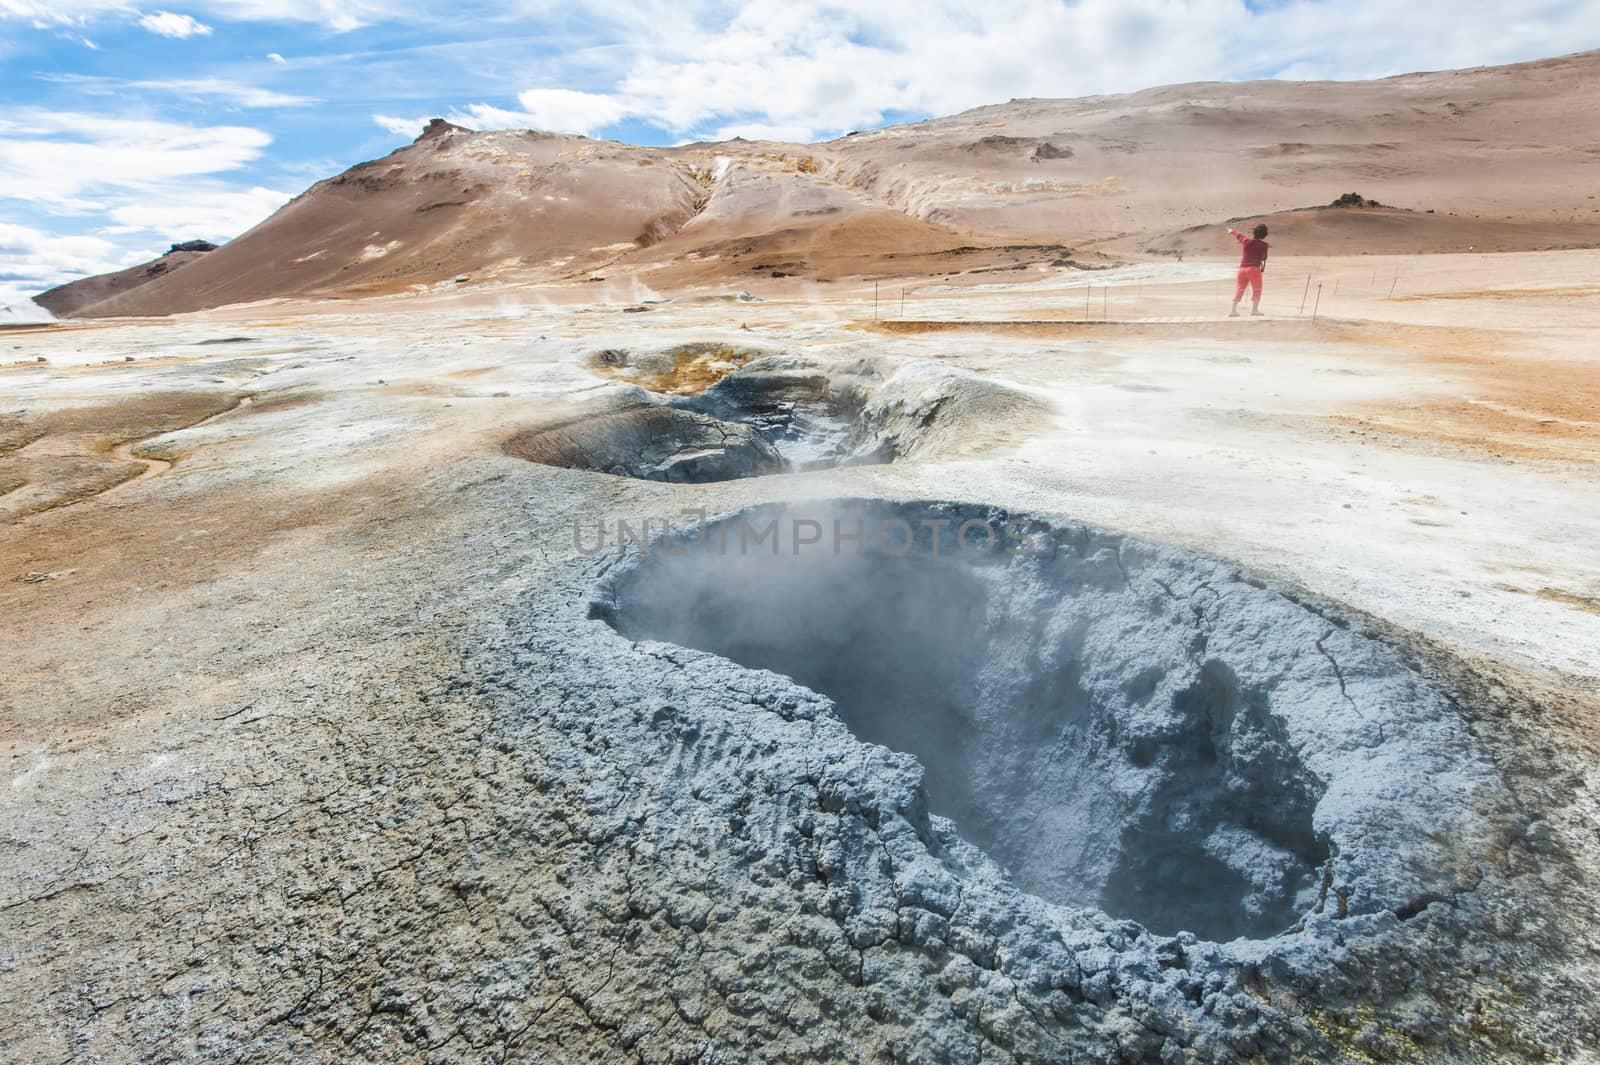 Mudpot in the geothermal area Hverir, Iceland. The area around the boiling mud is multicolored and cracked. HDR image